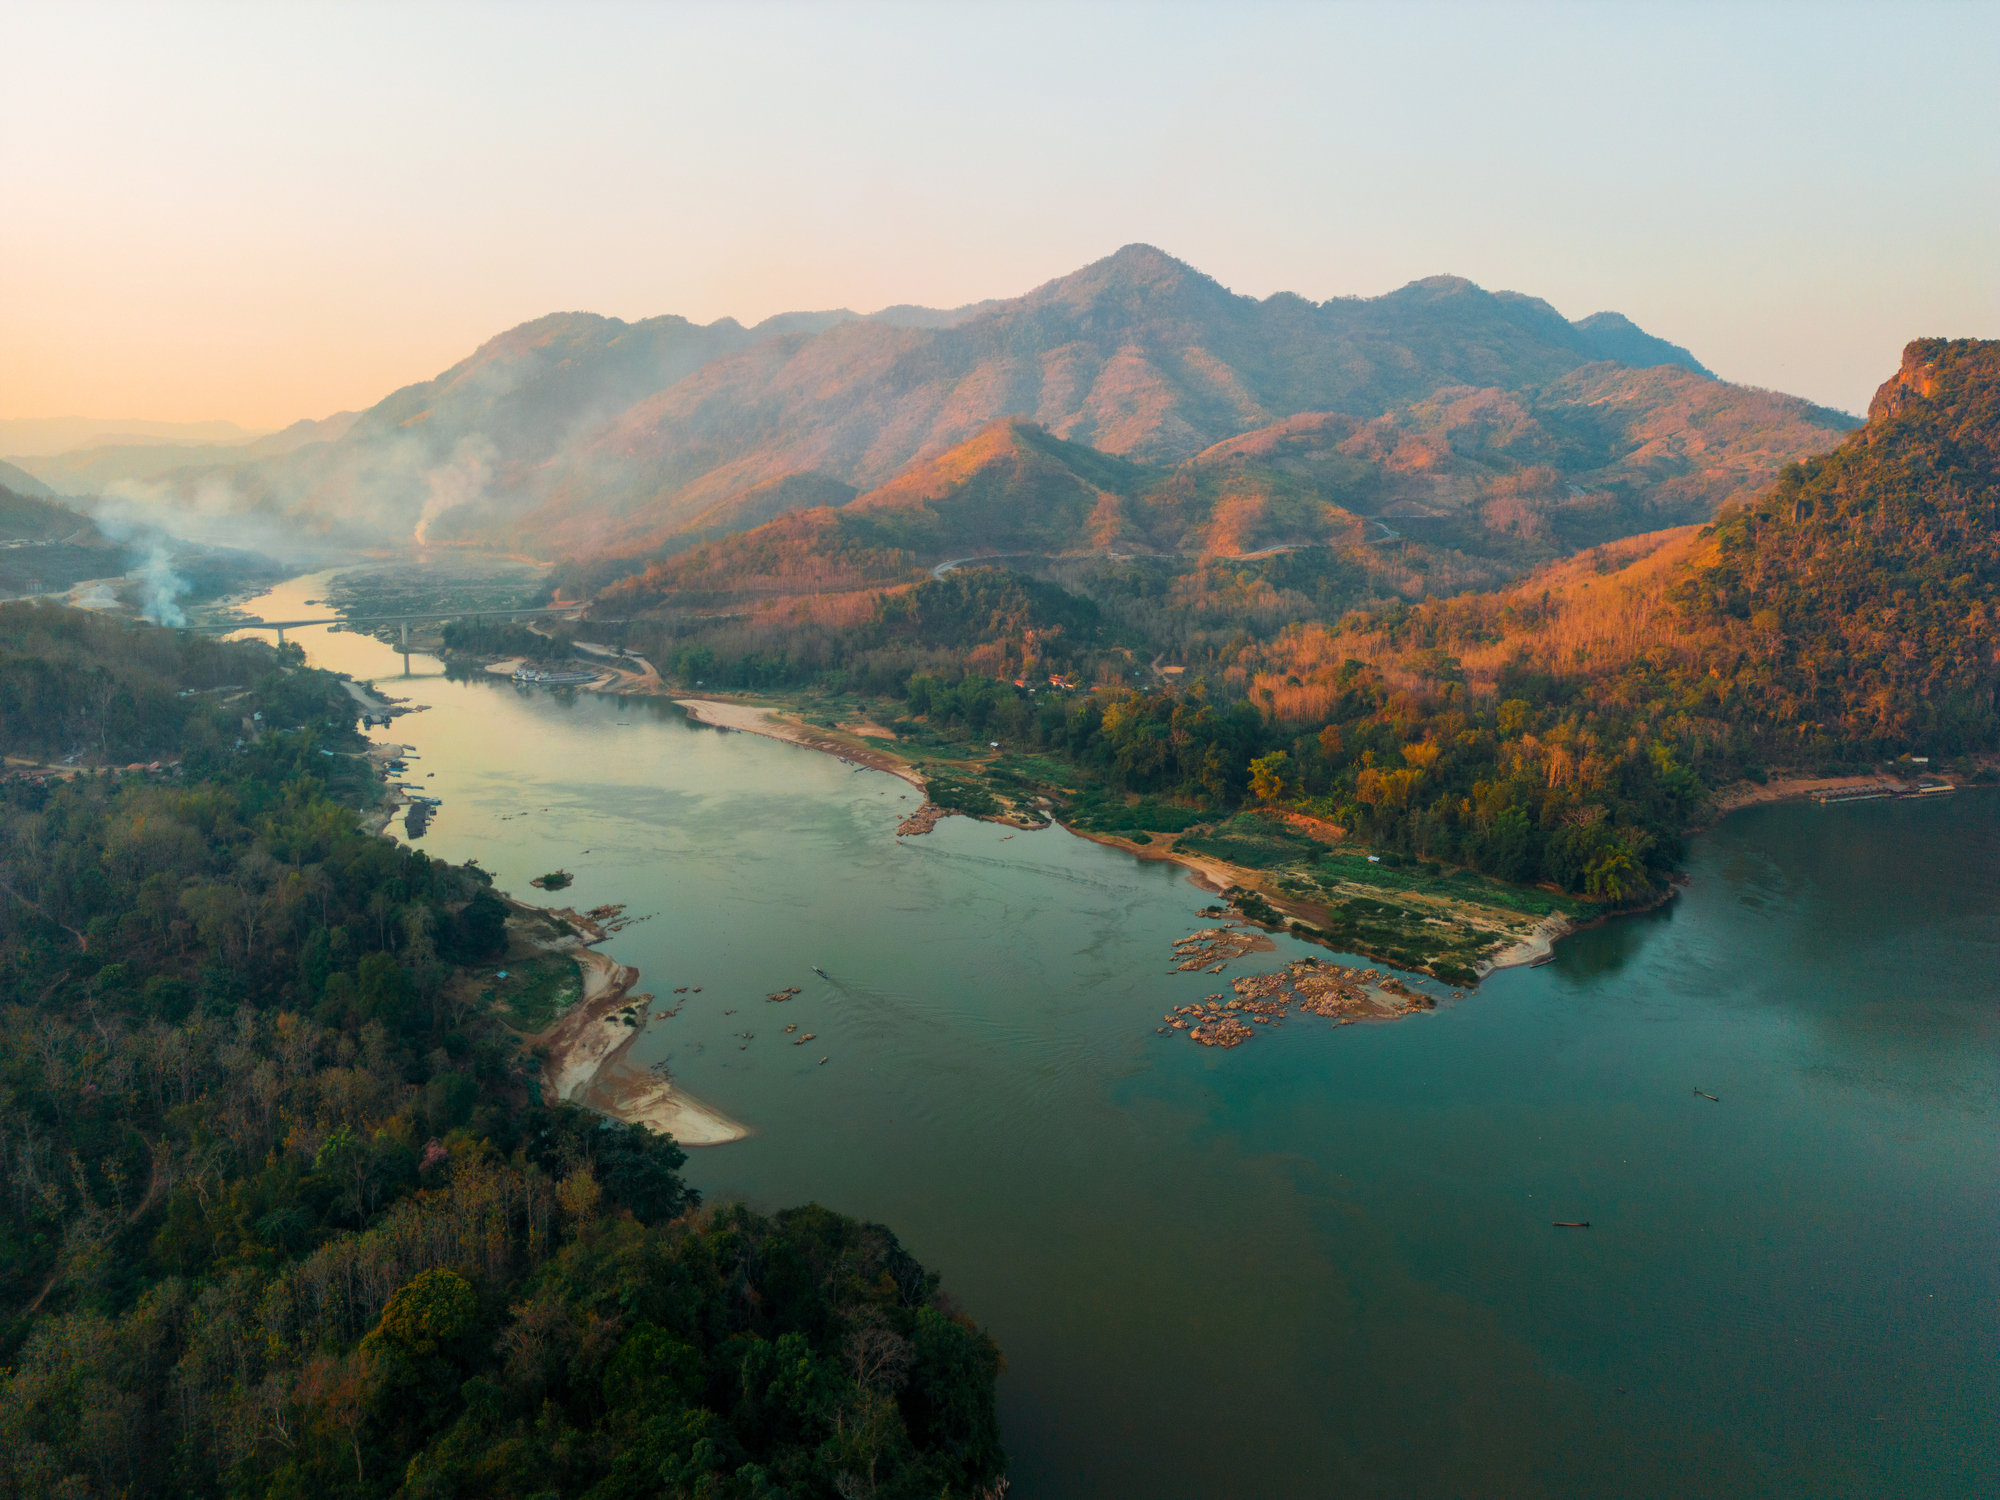 Aerial view of a winding river with adjacent forests and mountains during sunrise